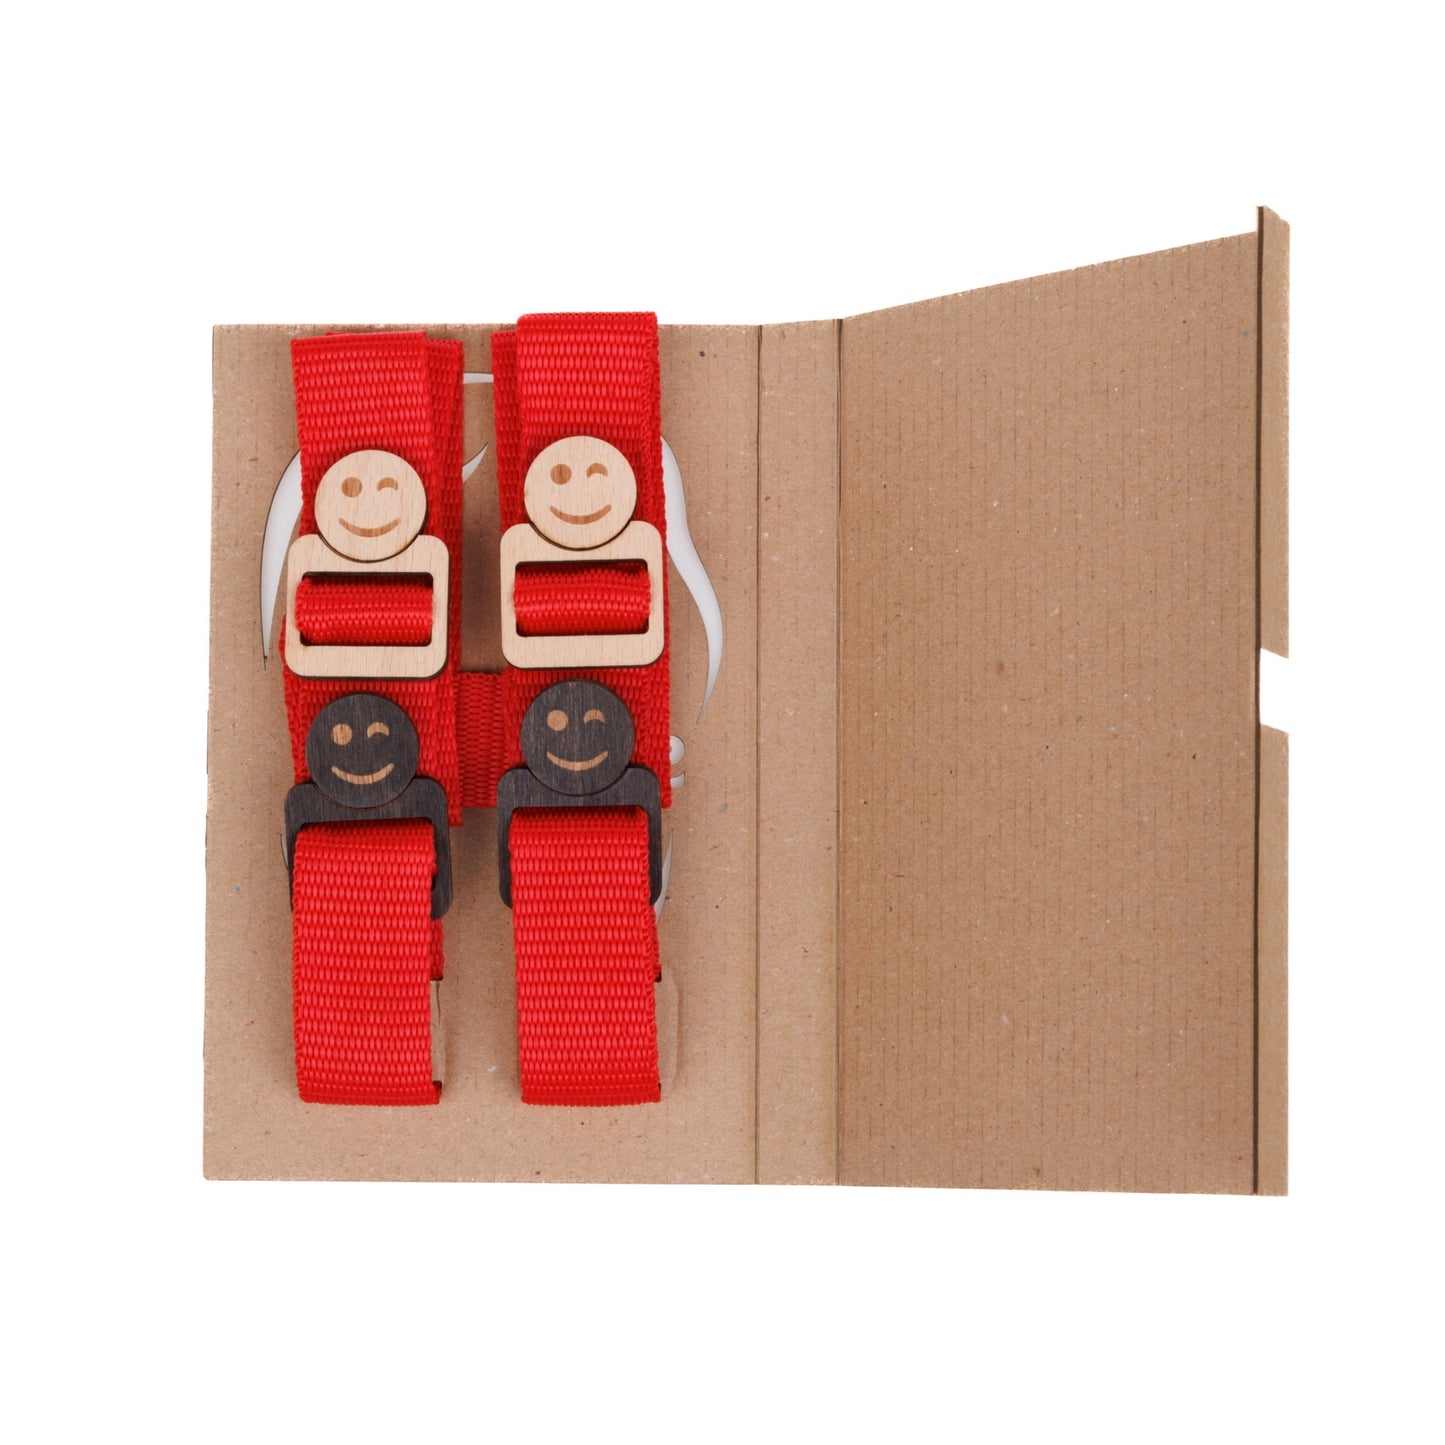 The red fabric neckstrap designed for Jollylook cameras, featuring a sturdy brown-stained lock, both components juxtaposed for securely carrying and utilizing the camera.